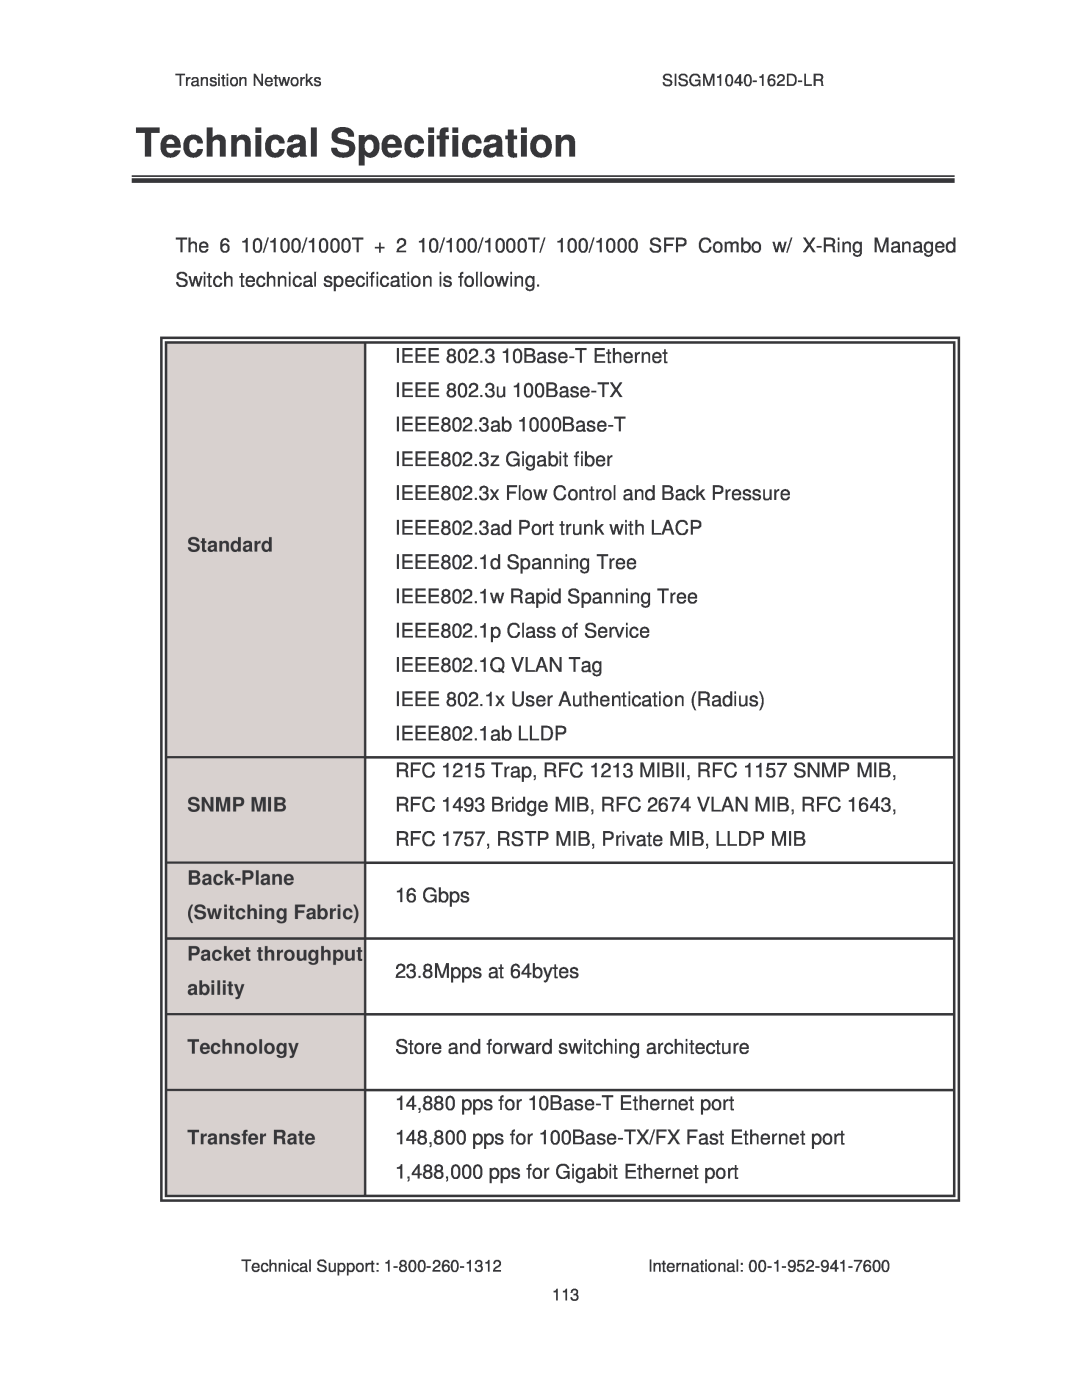 Transition Networks SISGM1040-162D manual Technical Specification 